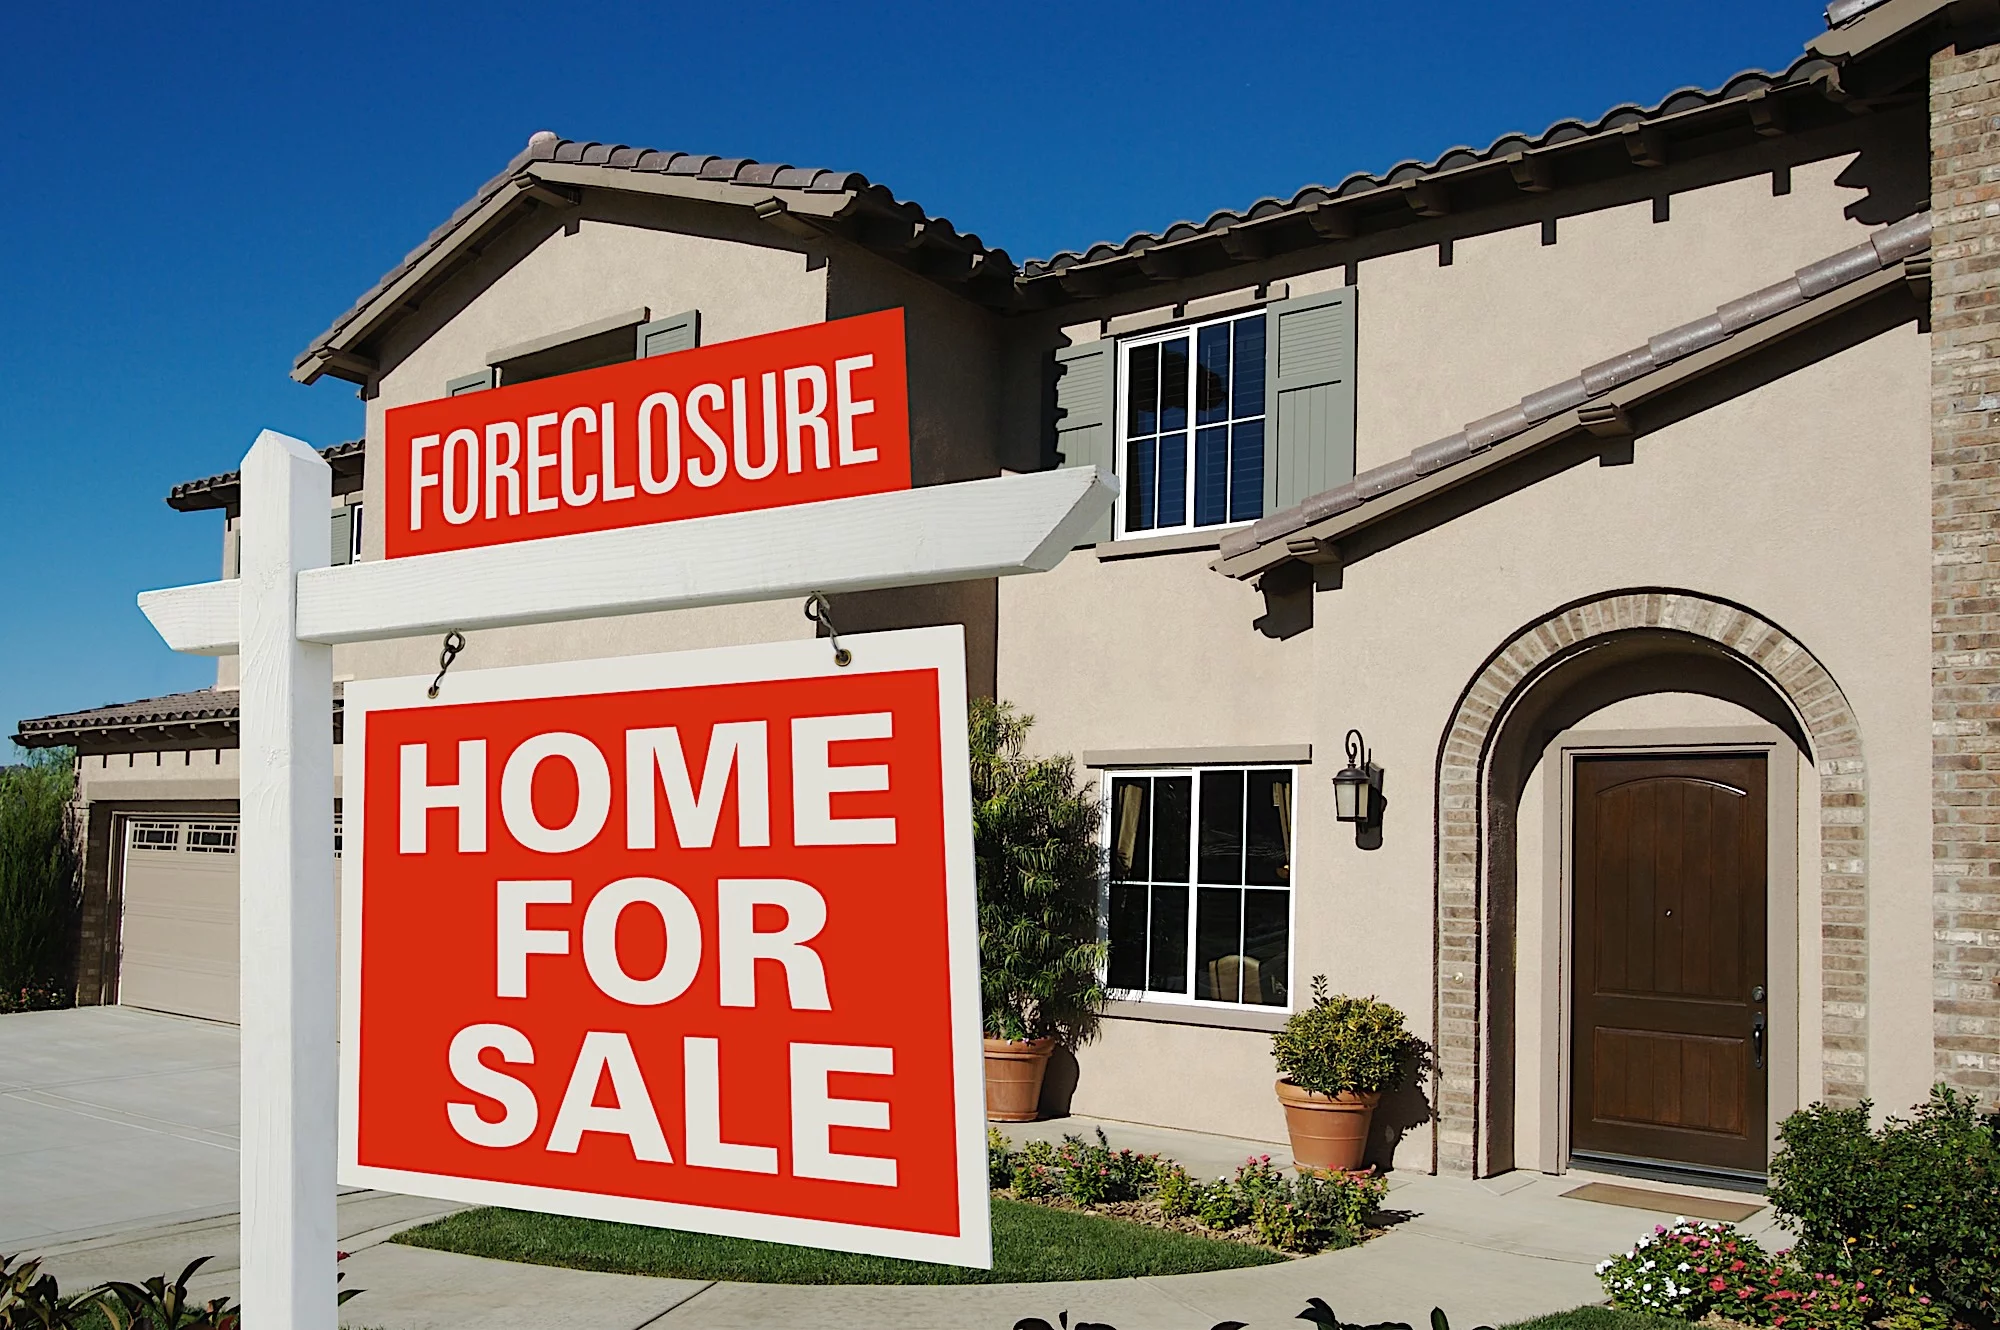 How to Buy Foreclosure Homes Ontario